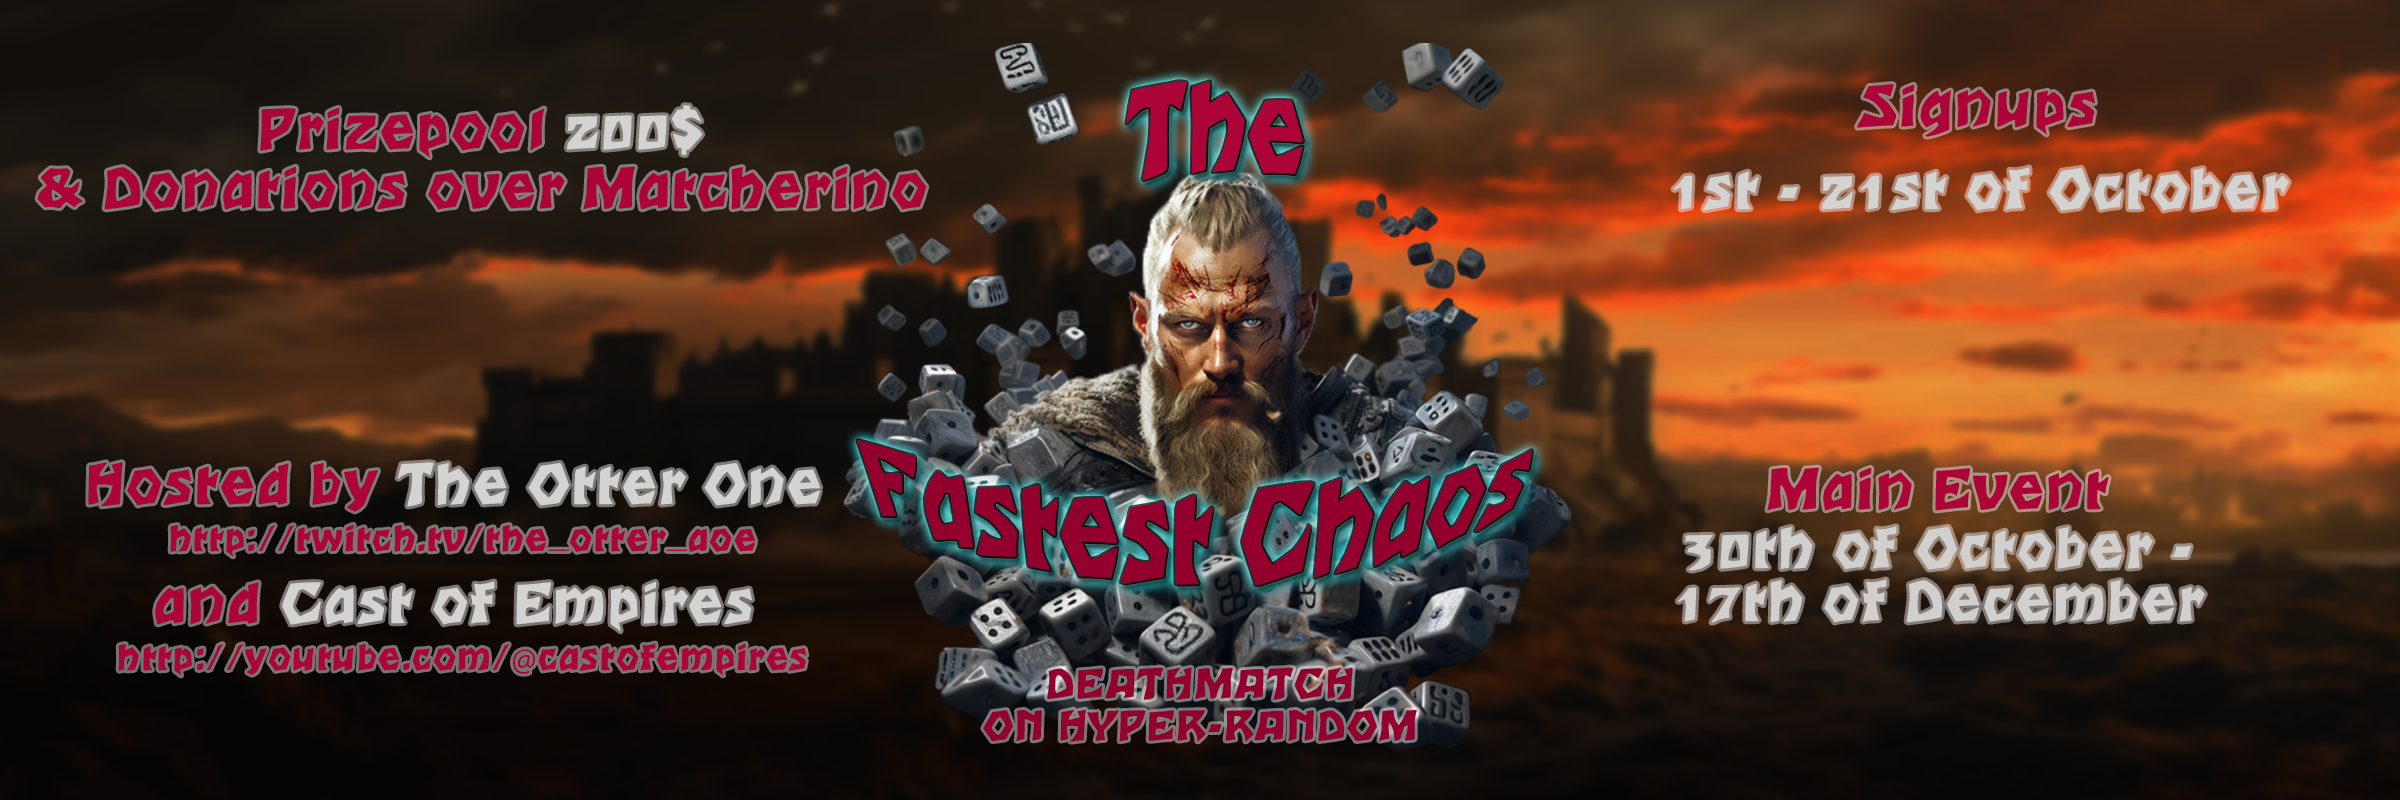 The_Fastest_Chaos_Tournament_Banner_10.png